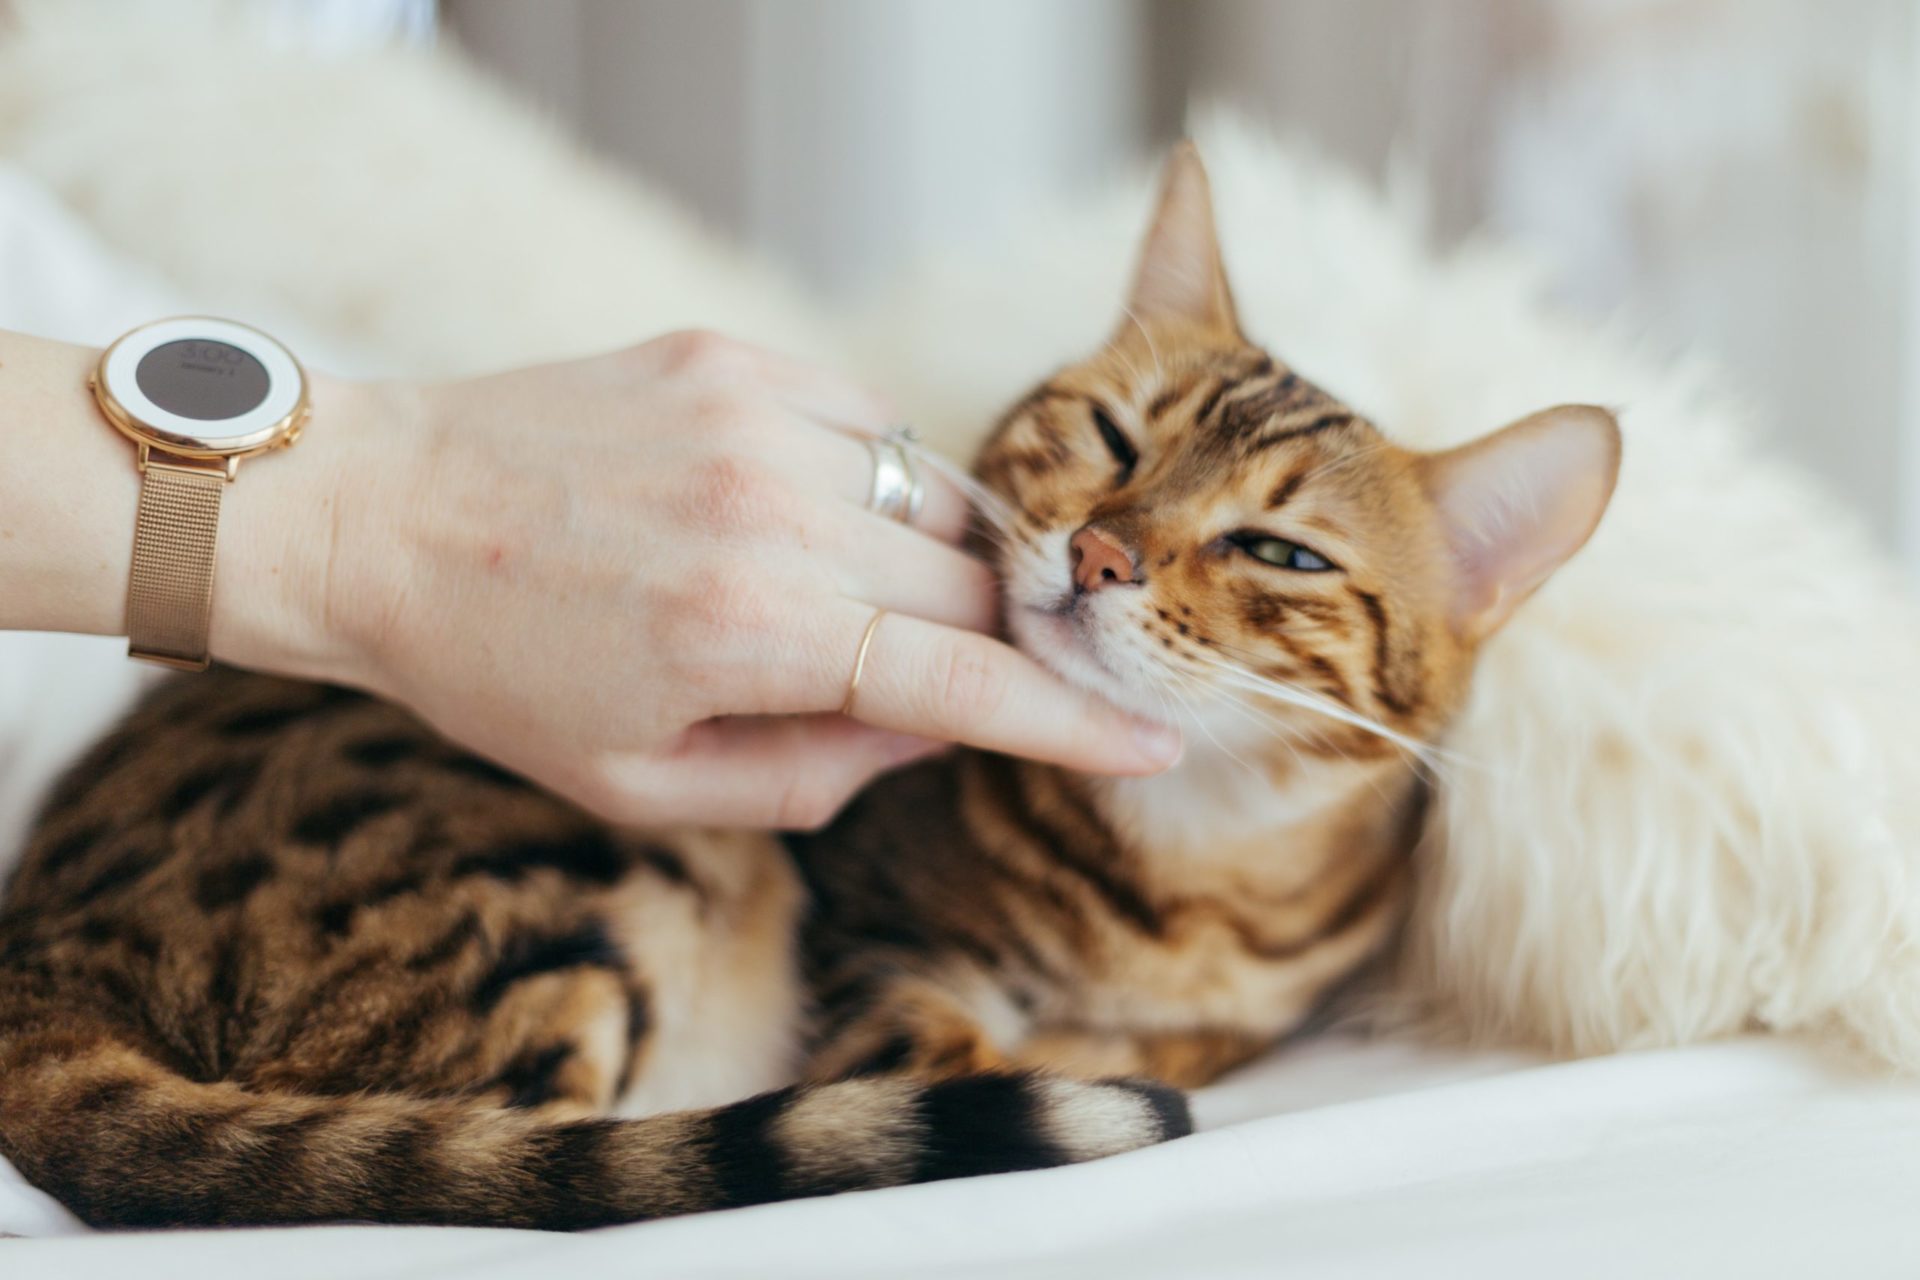 How Can I Make Sure my Pet is Happy During Coronavirus?